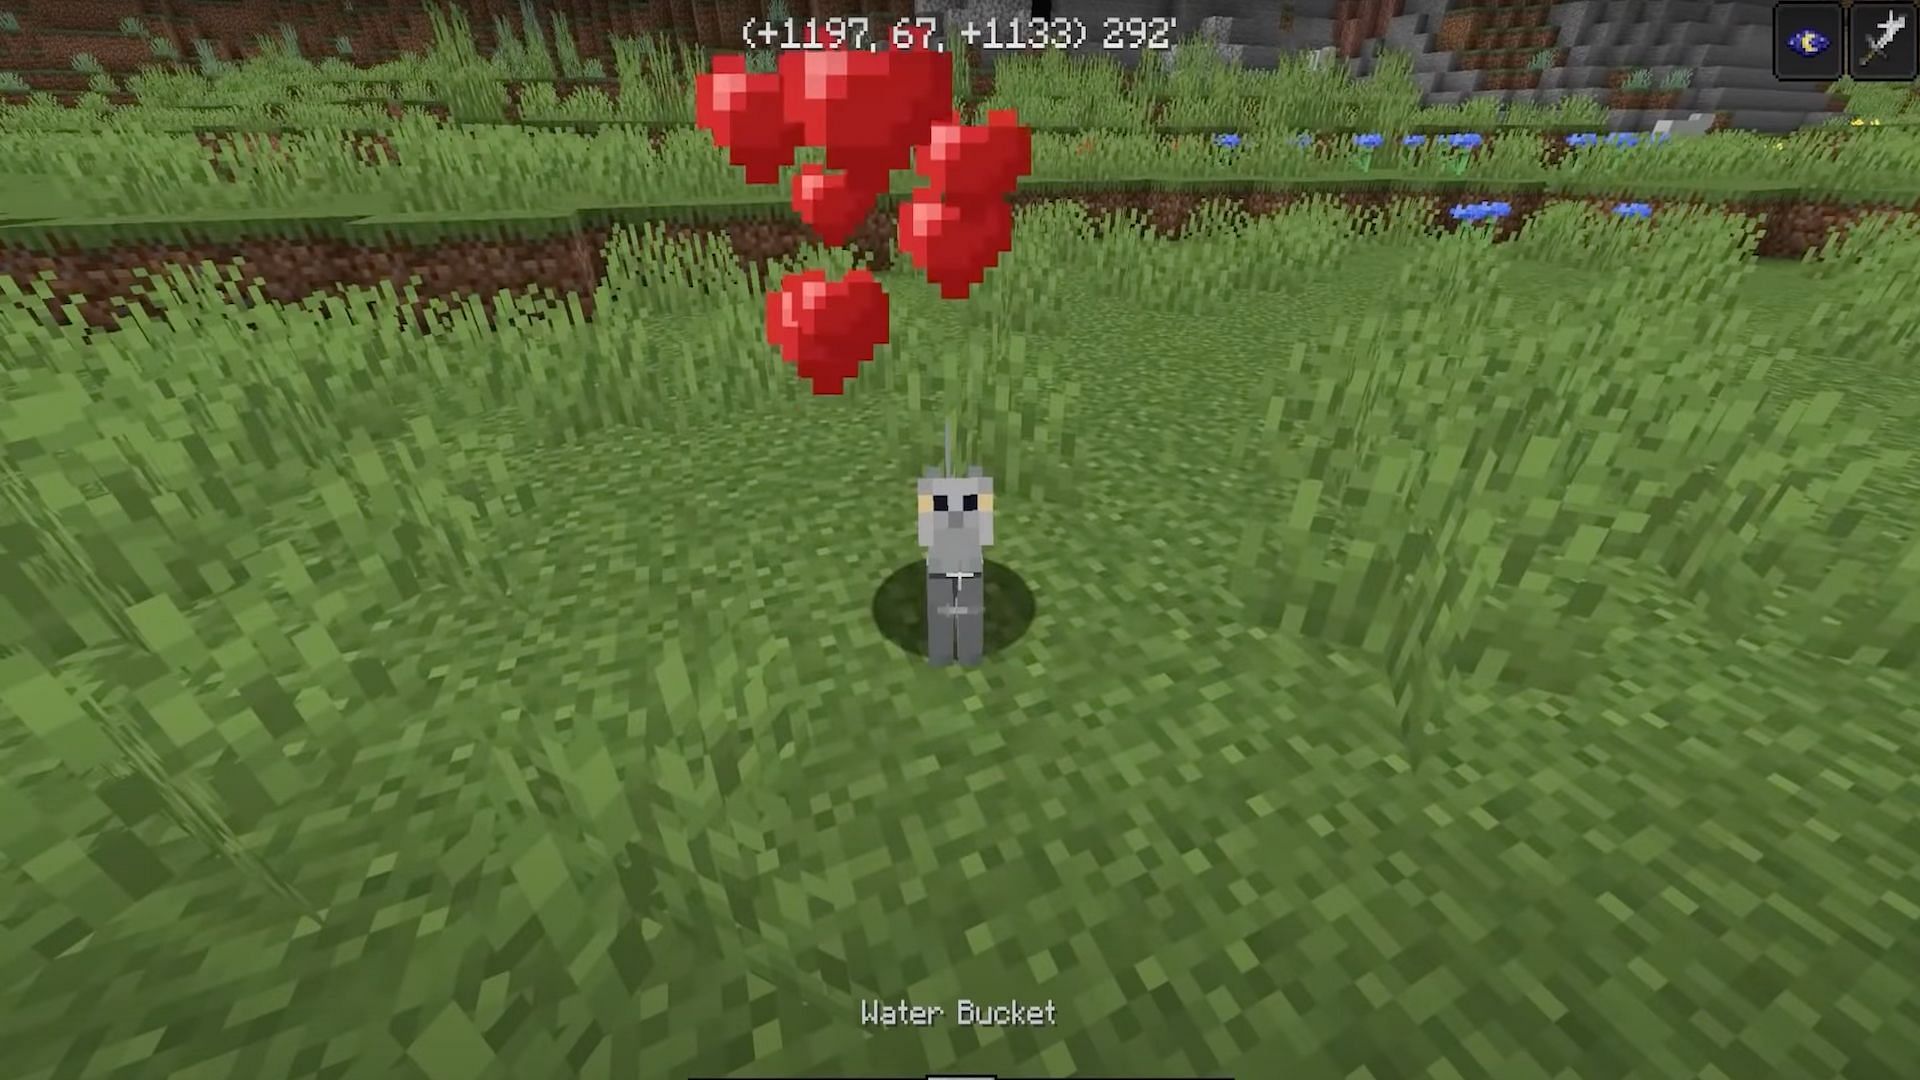 Minecraft players will need to tame cats to scare the creepers (Image via Dusty Dude/YouTube)